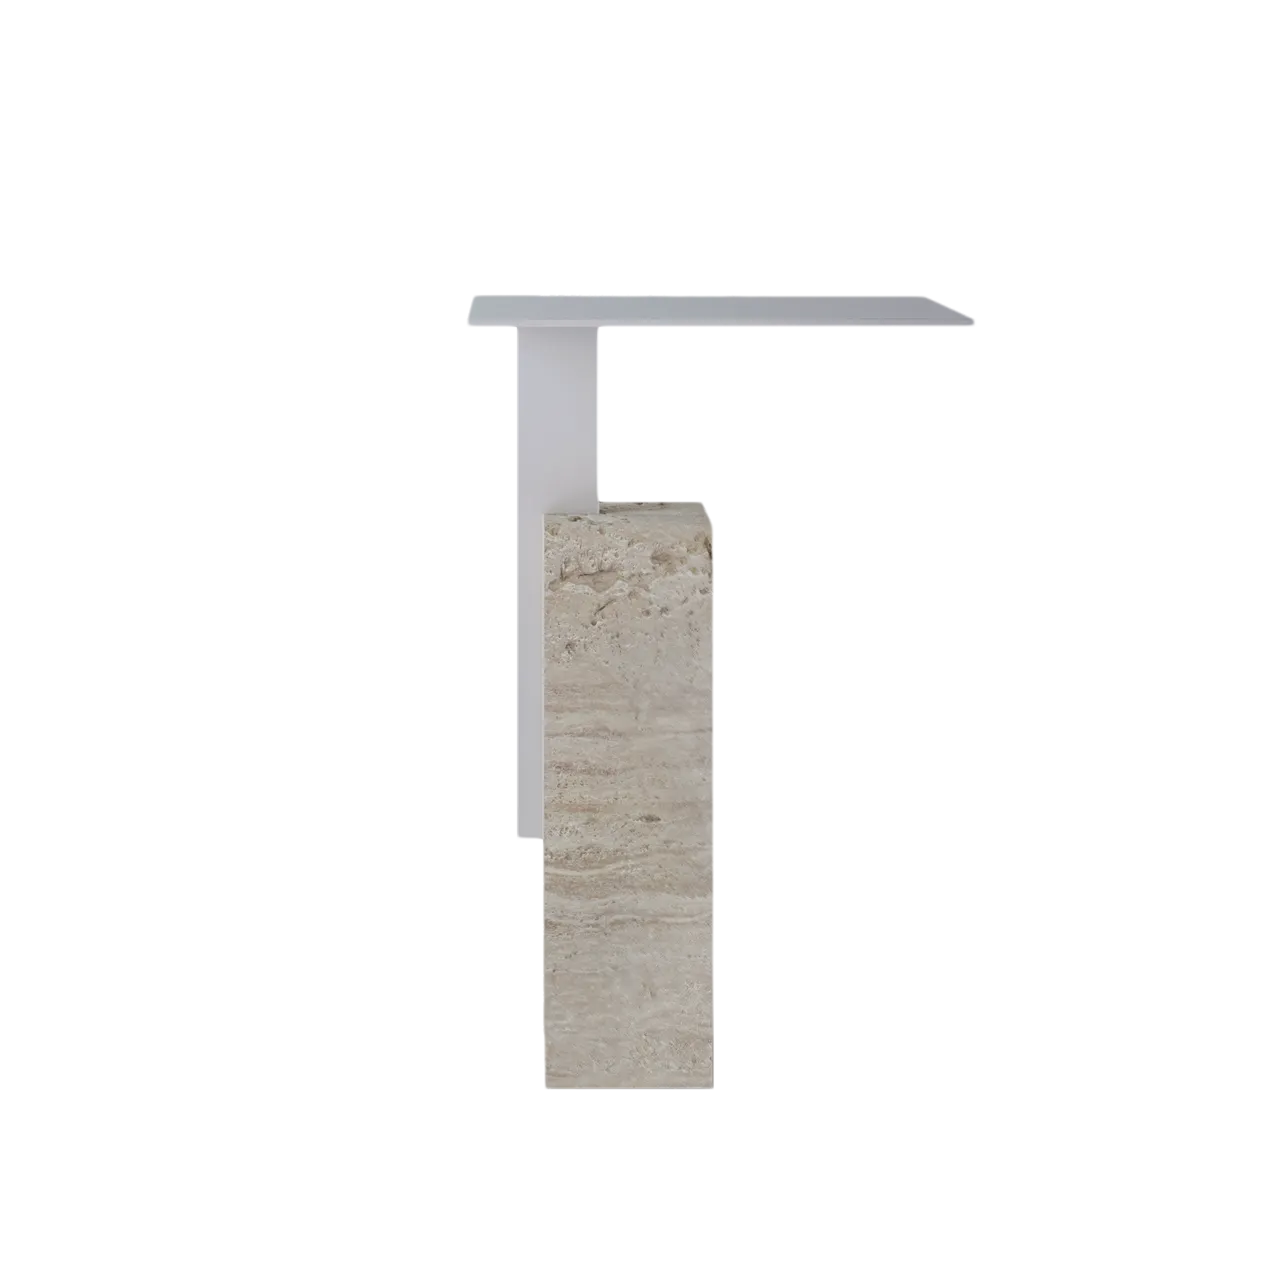 Travertine and Metal Side Table - $1,980.00